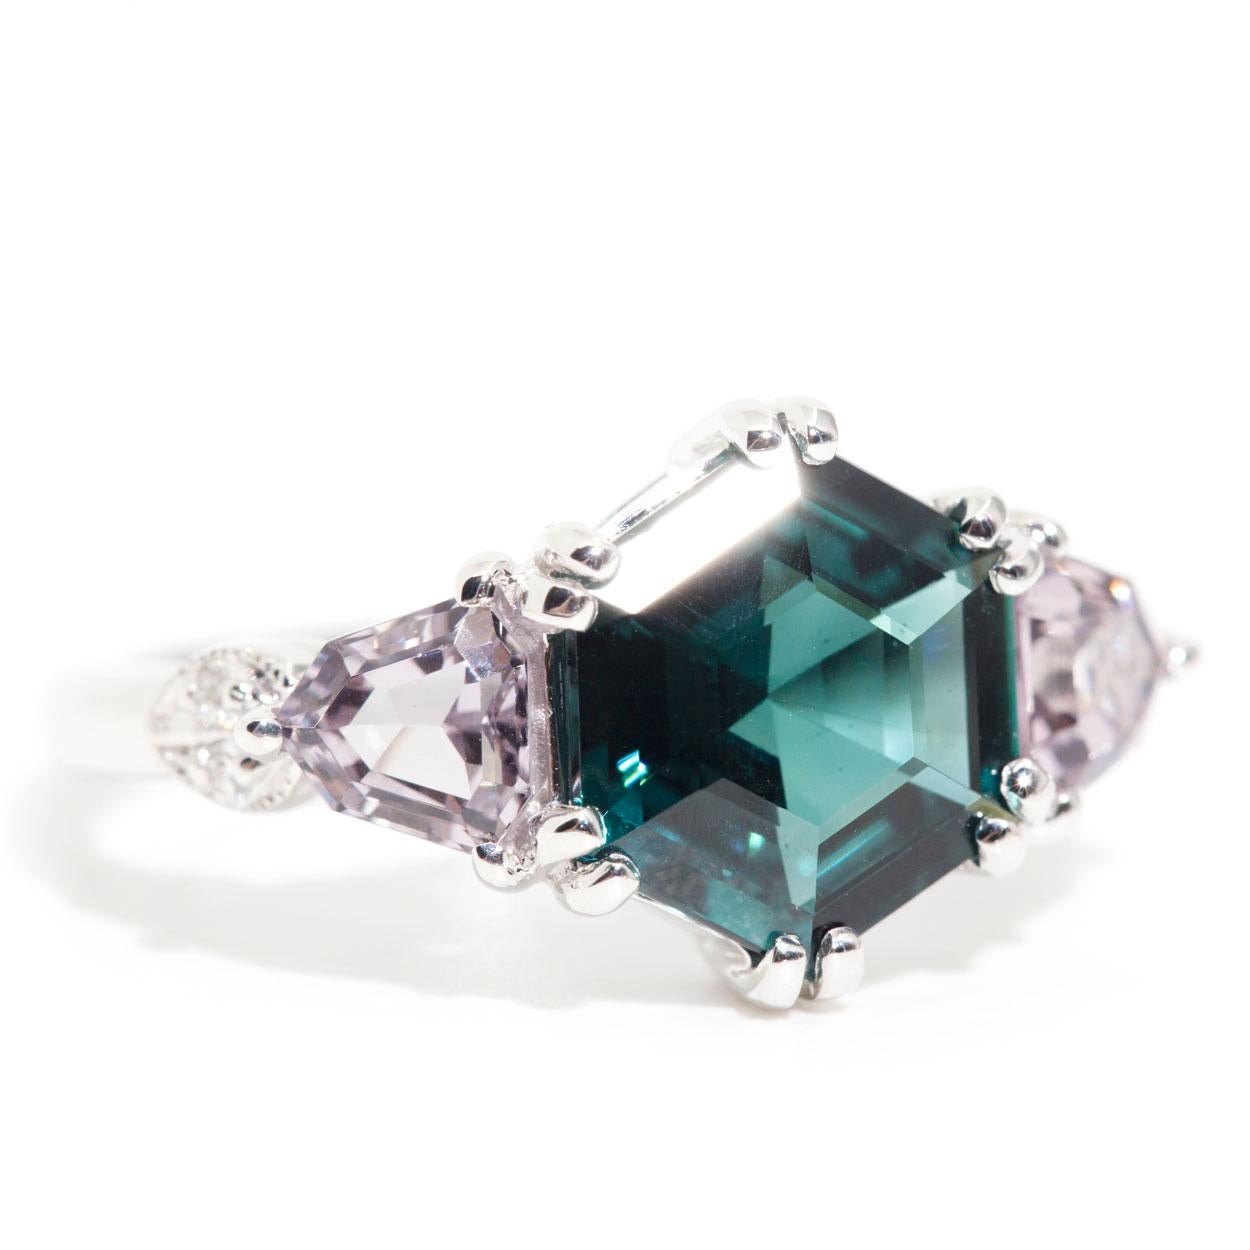 Forged in 18 carat white gold is this contemporary ring featuring a striking 2.46 carat hexagon cut bright deep teal tourmaline flanked with two bright pale purple shield cut Spinels, finished with sparkling round brilliant diamonds. We have named